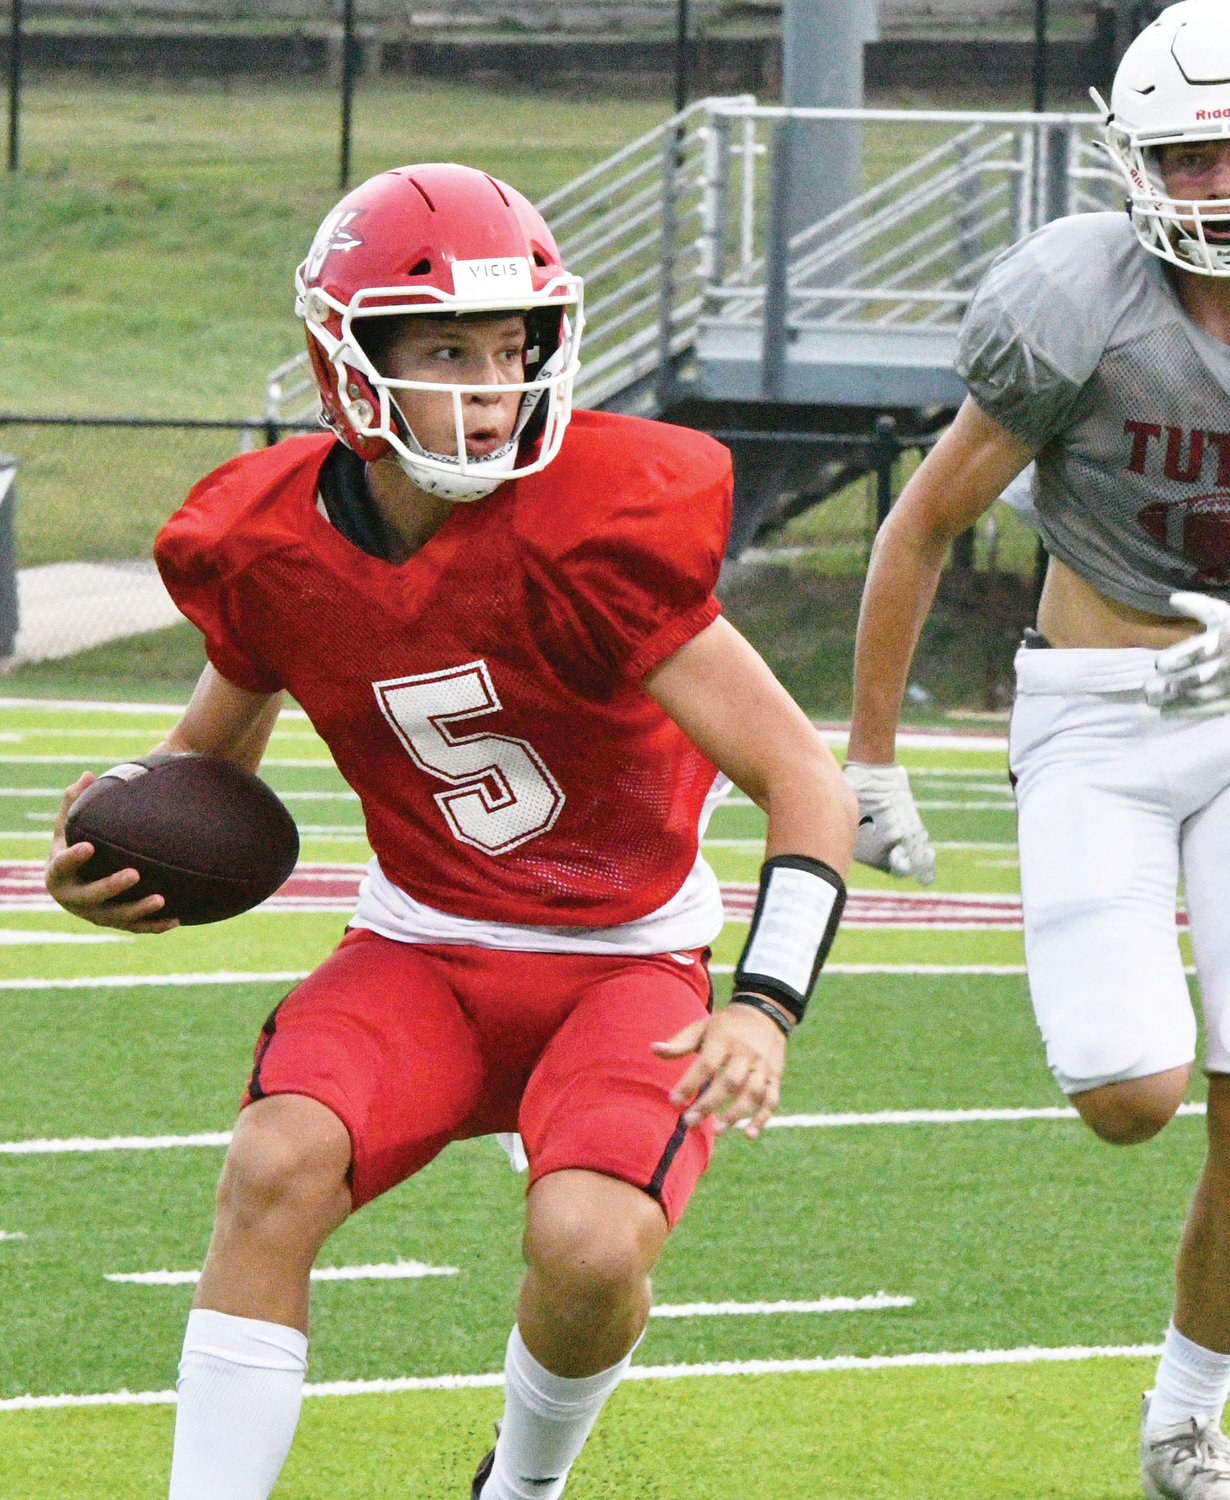 Washington junior Jaxon Hendrix runs with the ball during the Warriors’ scrimmage against Tuttle on Thursday. Washington begins the regular season Friday night at home against Pawnee. Kickoff is set for 7 p.m.